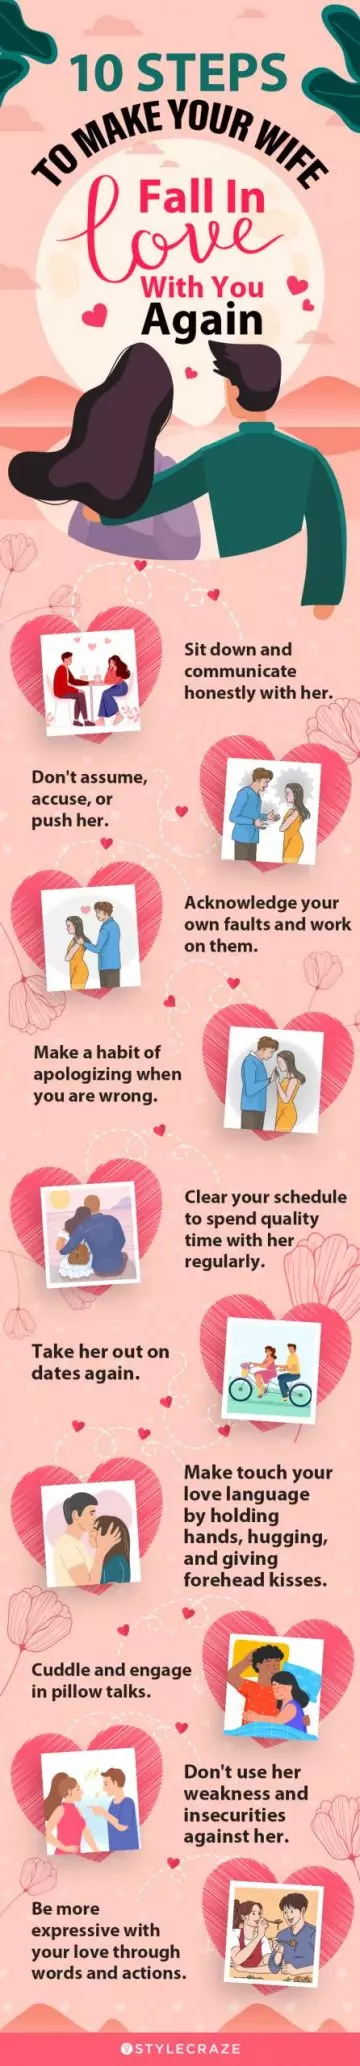 10 steps to make them fall in love with you again (infographic)